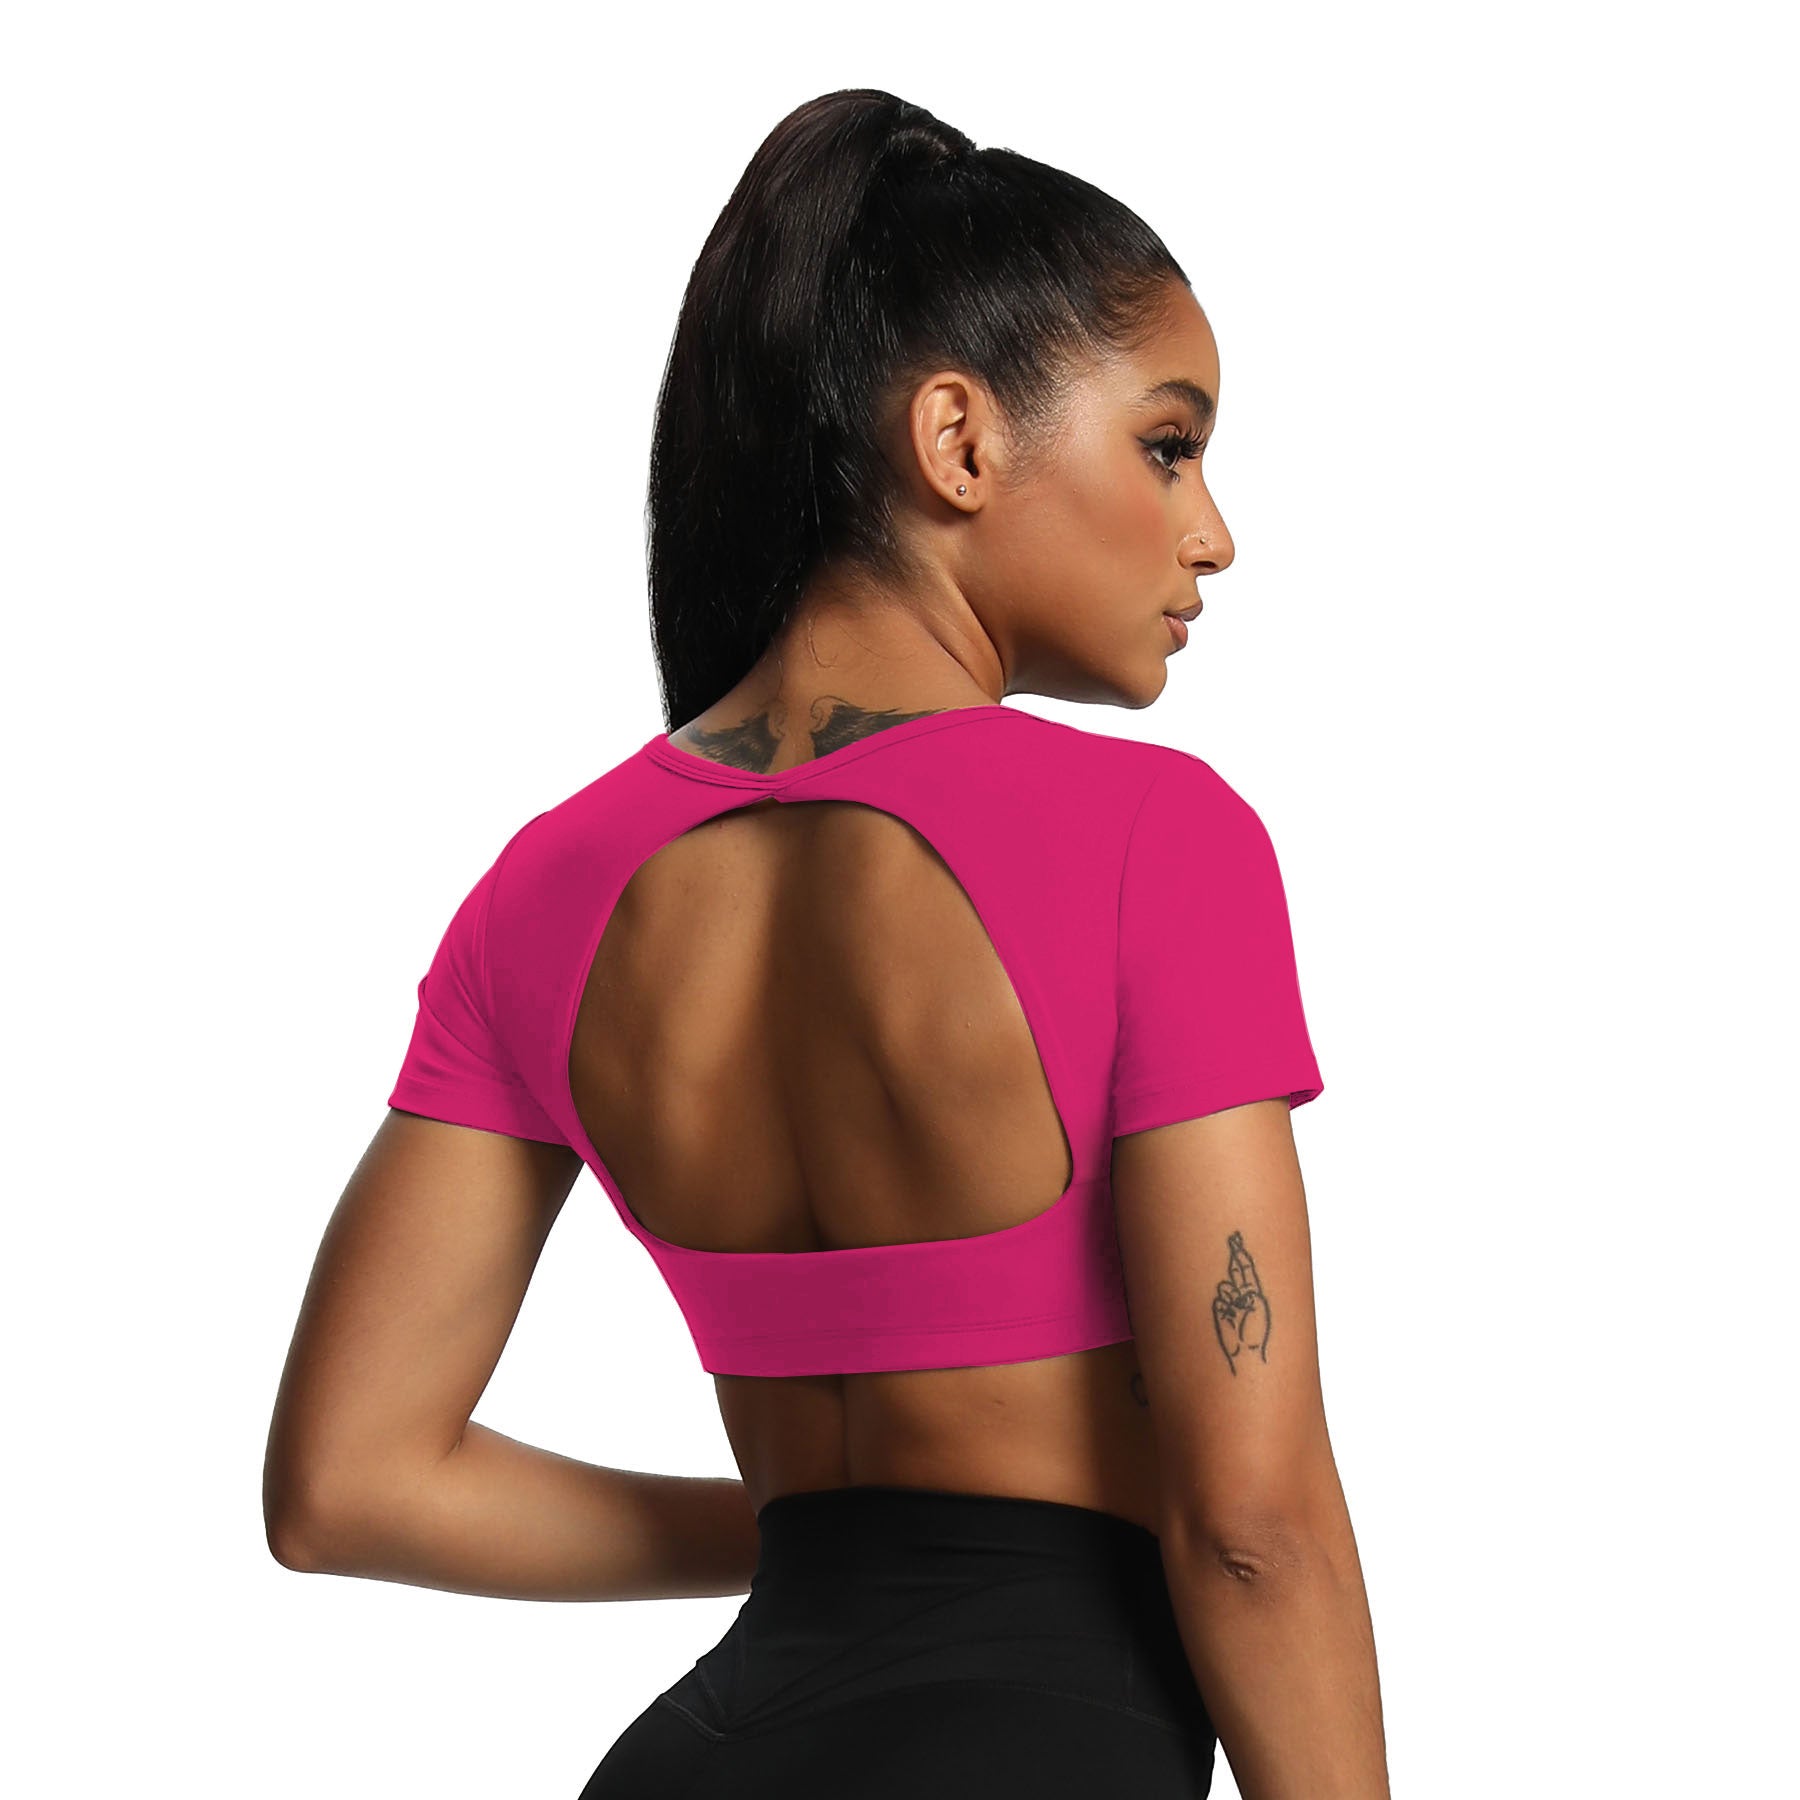 Aoxjox "Hollow Back" Crop Top Short Sleeve